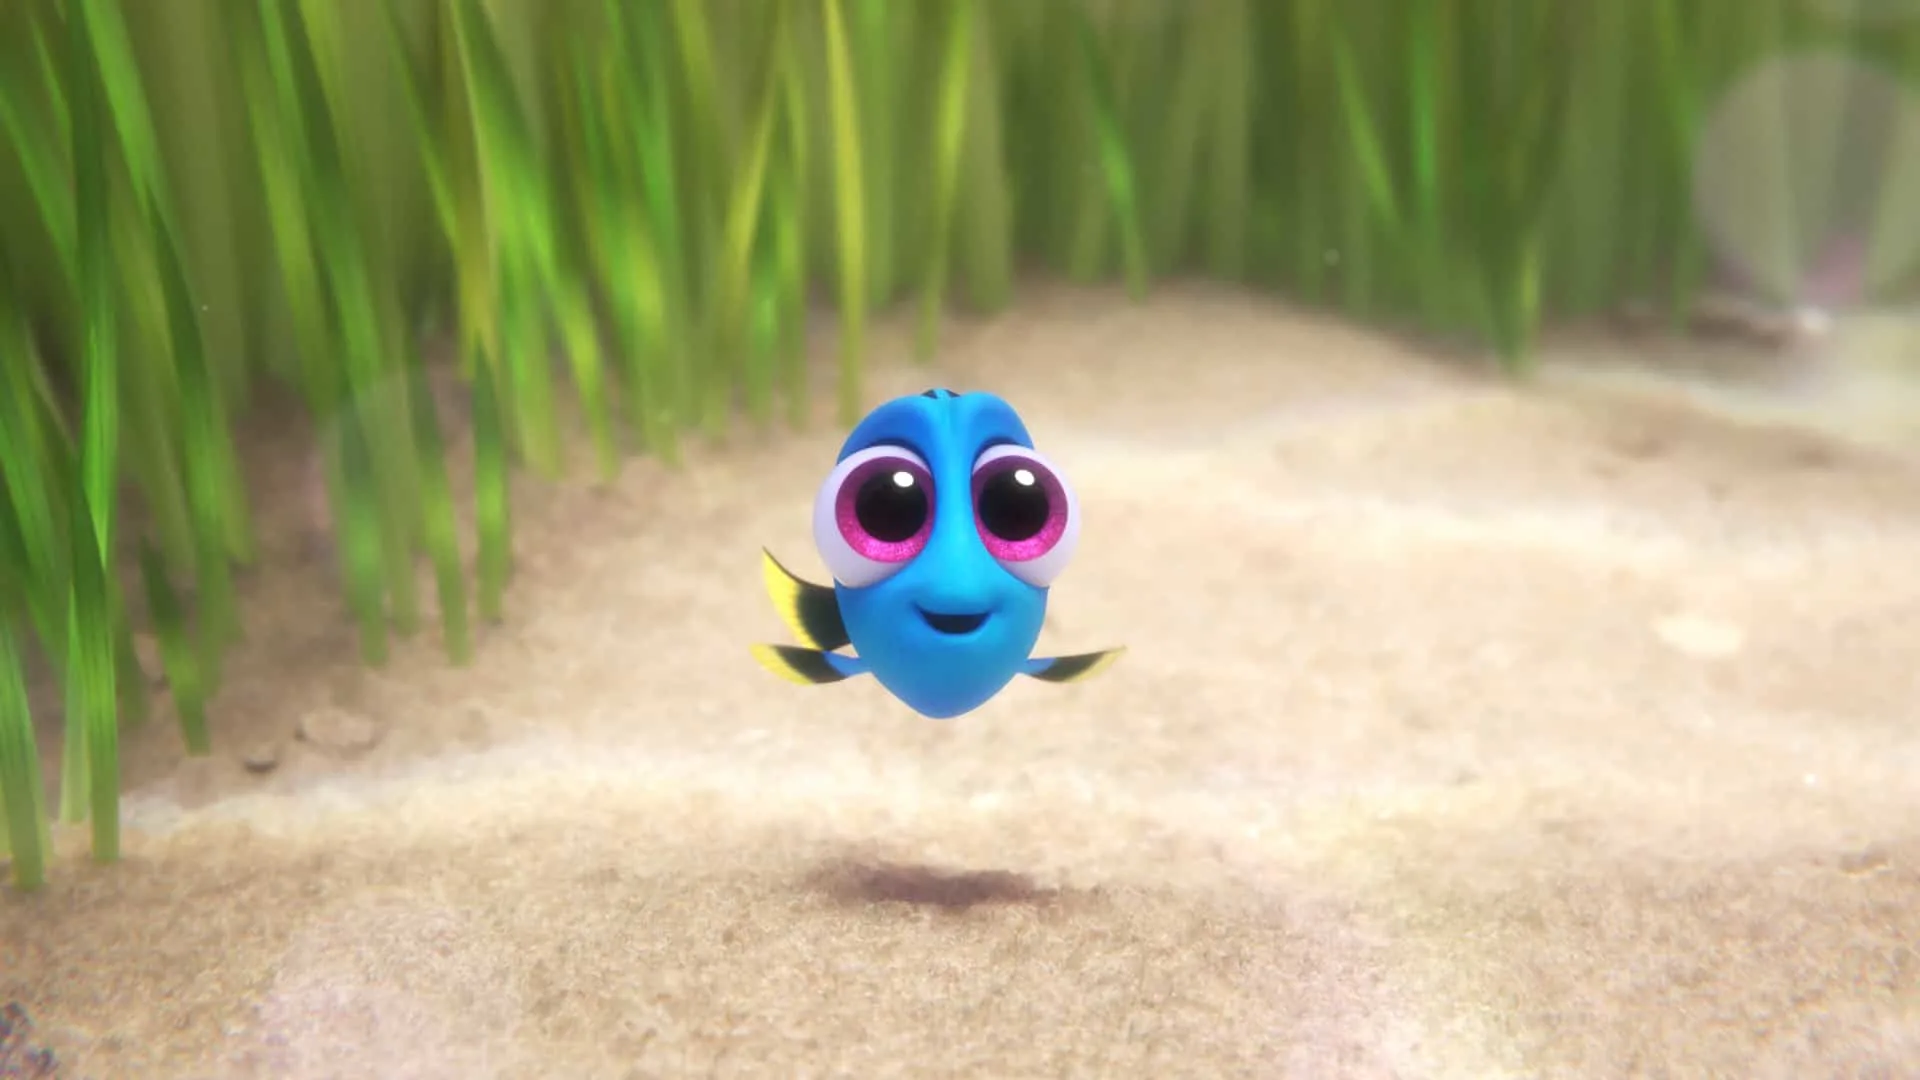 FINDING DORY – Pictured: Dory. ©2016 Disney•Pixar. All Rights Reserved.